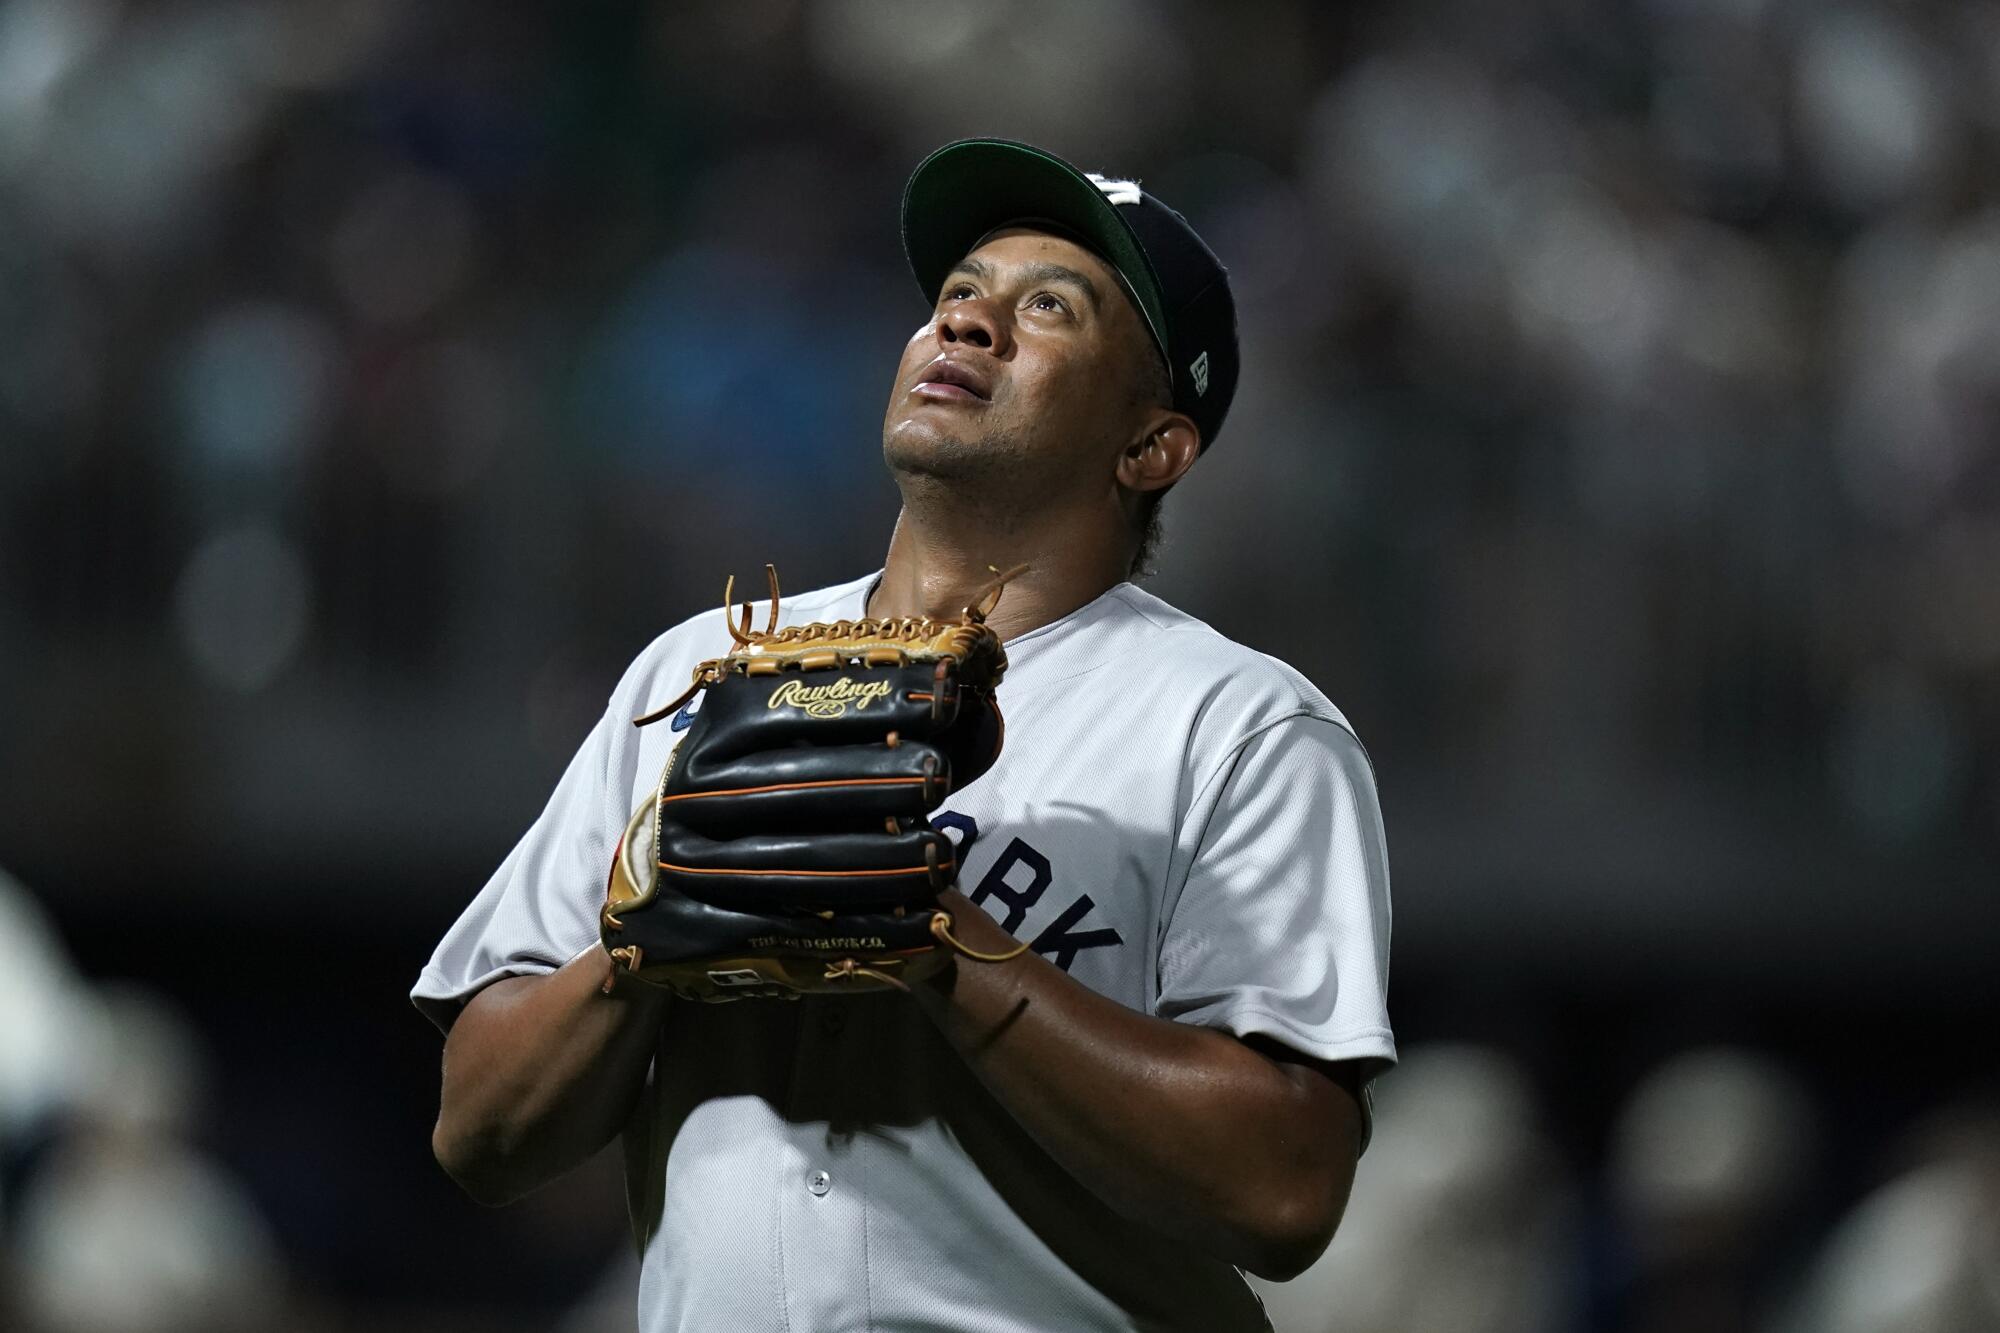 Yankees reliever Wandy Peralta reacts to a strikeout.